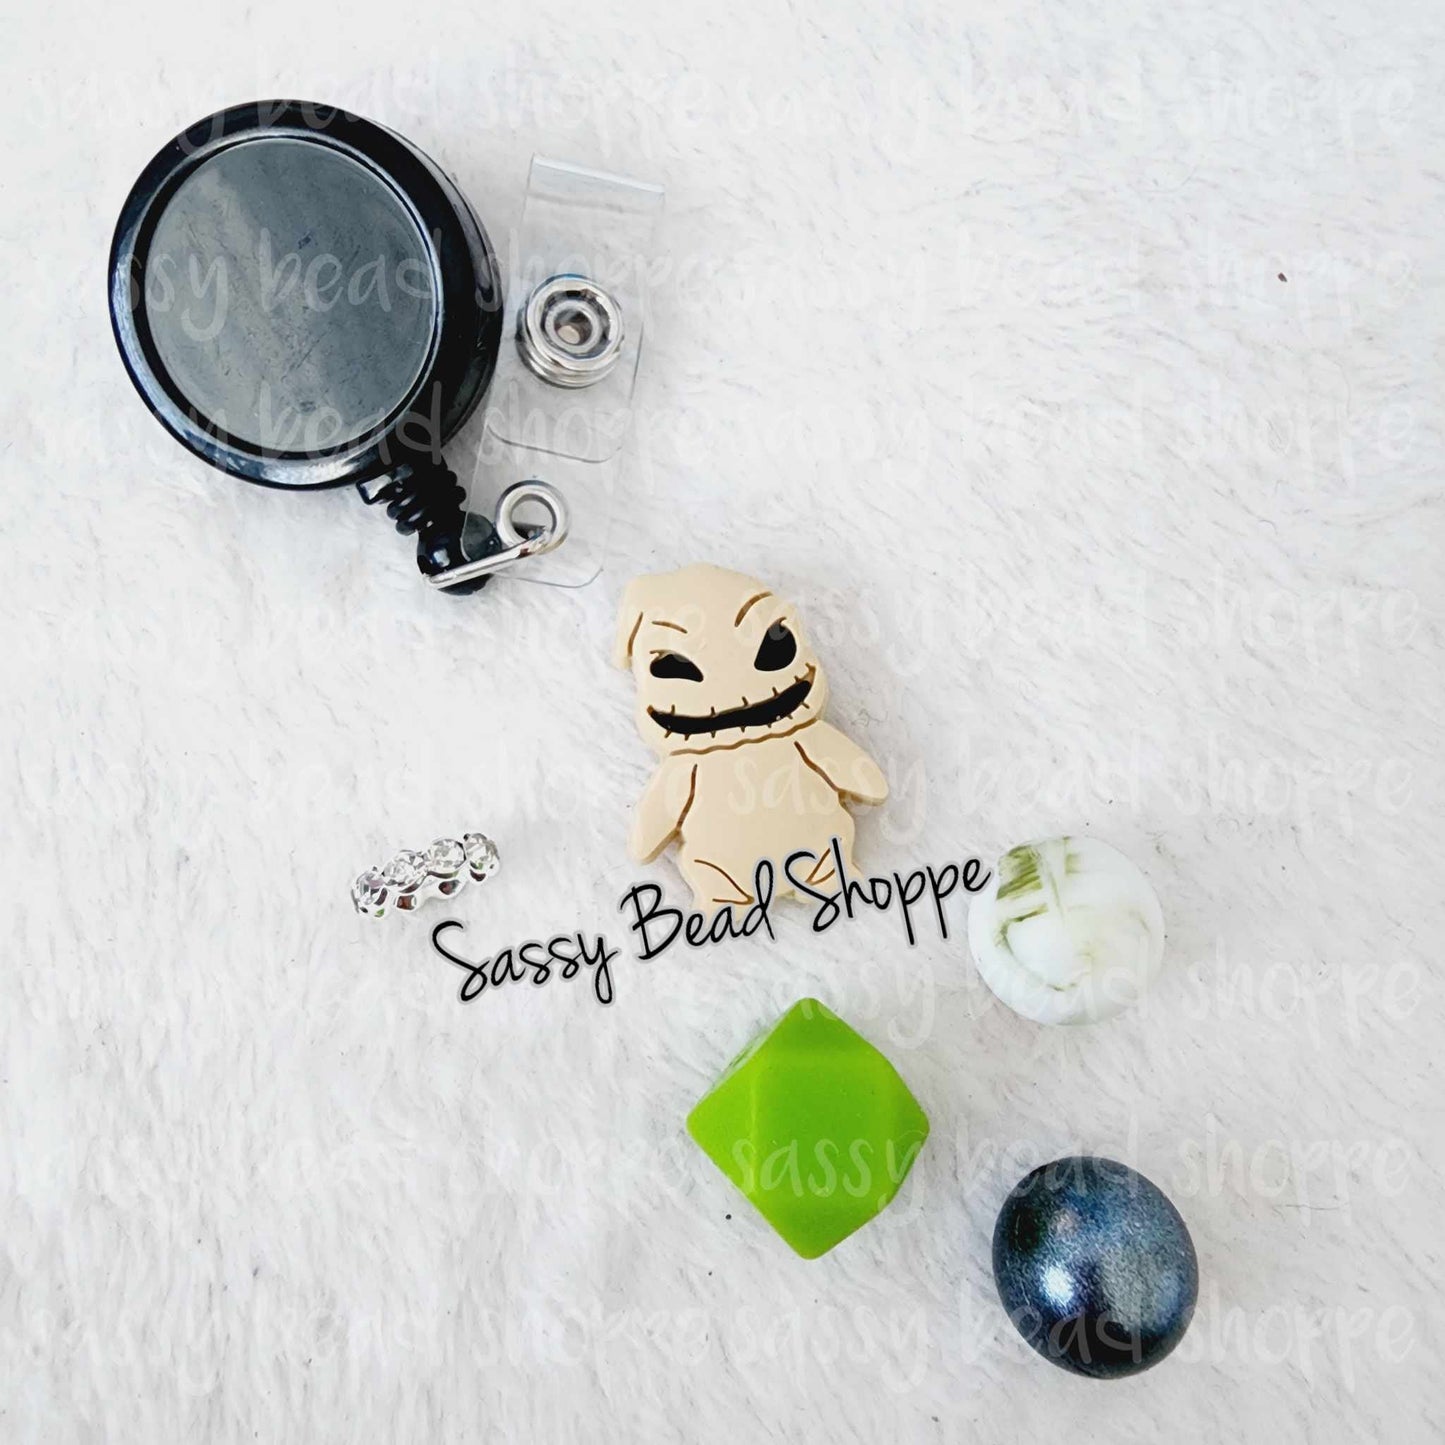 Sassy Bead Shoppe Frightful Dreams Badge Reel What you will receive in your kit